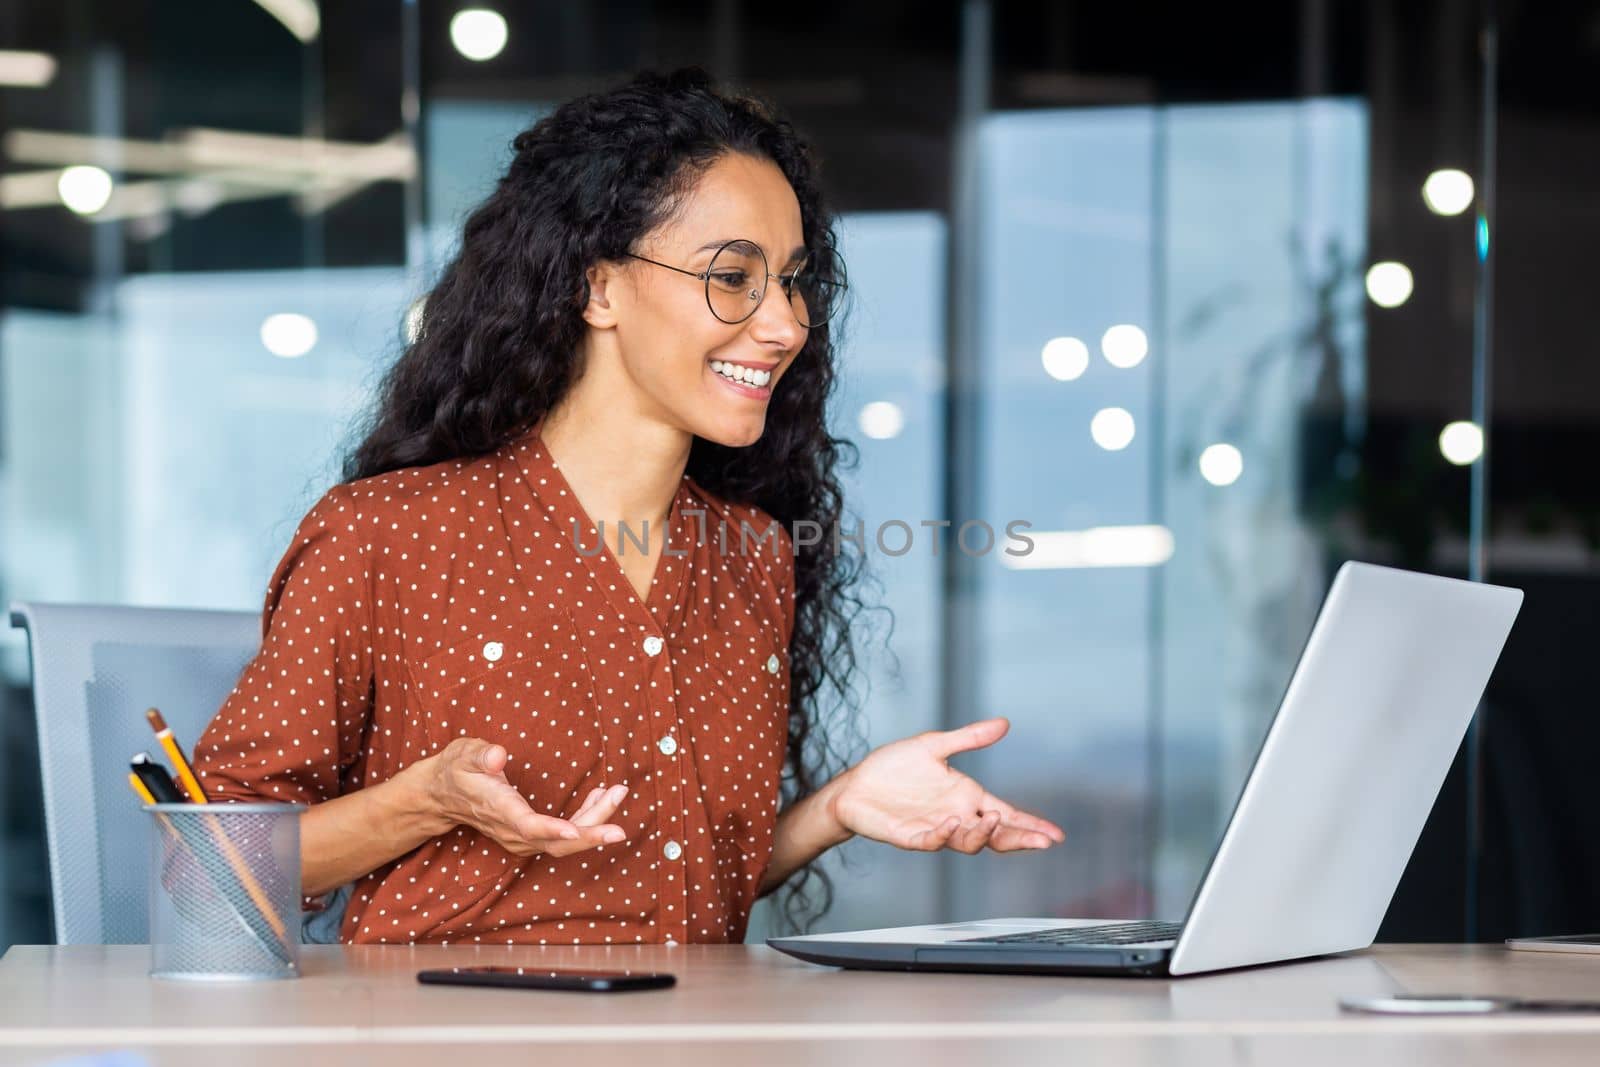 Cheerful and successful Latin American businesswoman talking remotely via video call with colleagues and partners, office worker inside the office using a laptop at work.